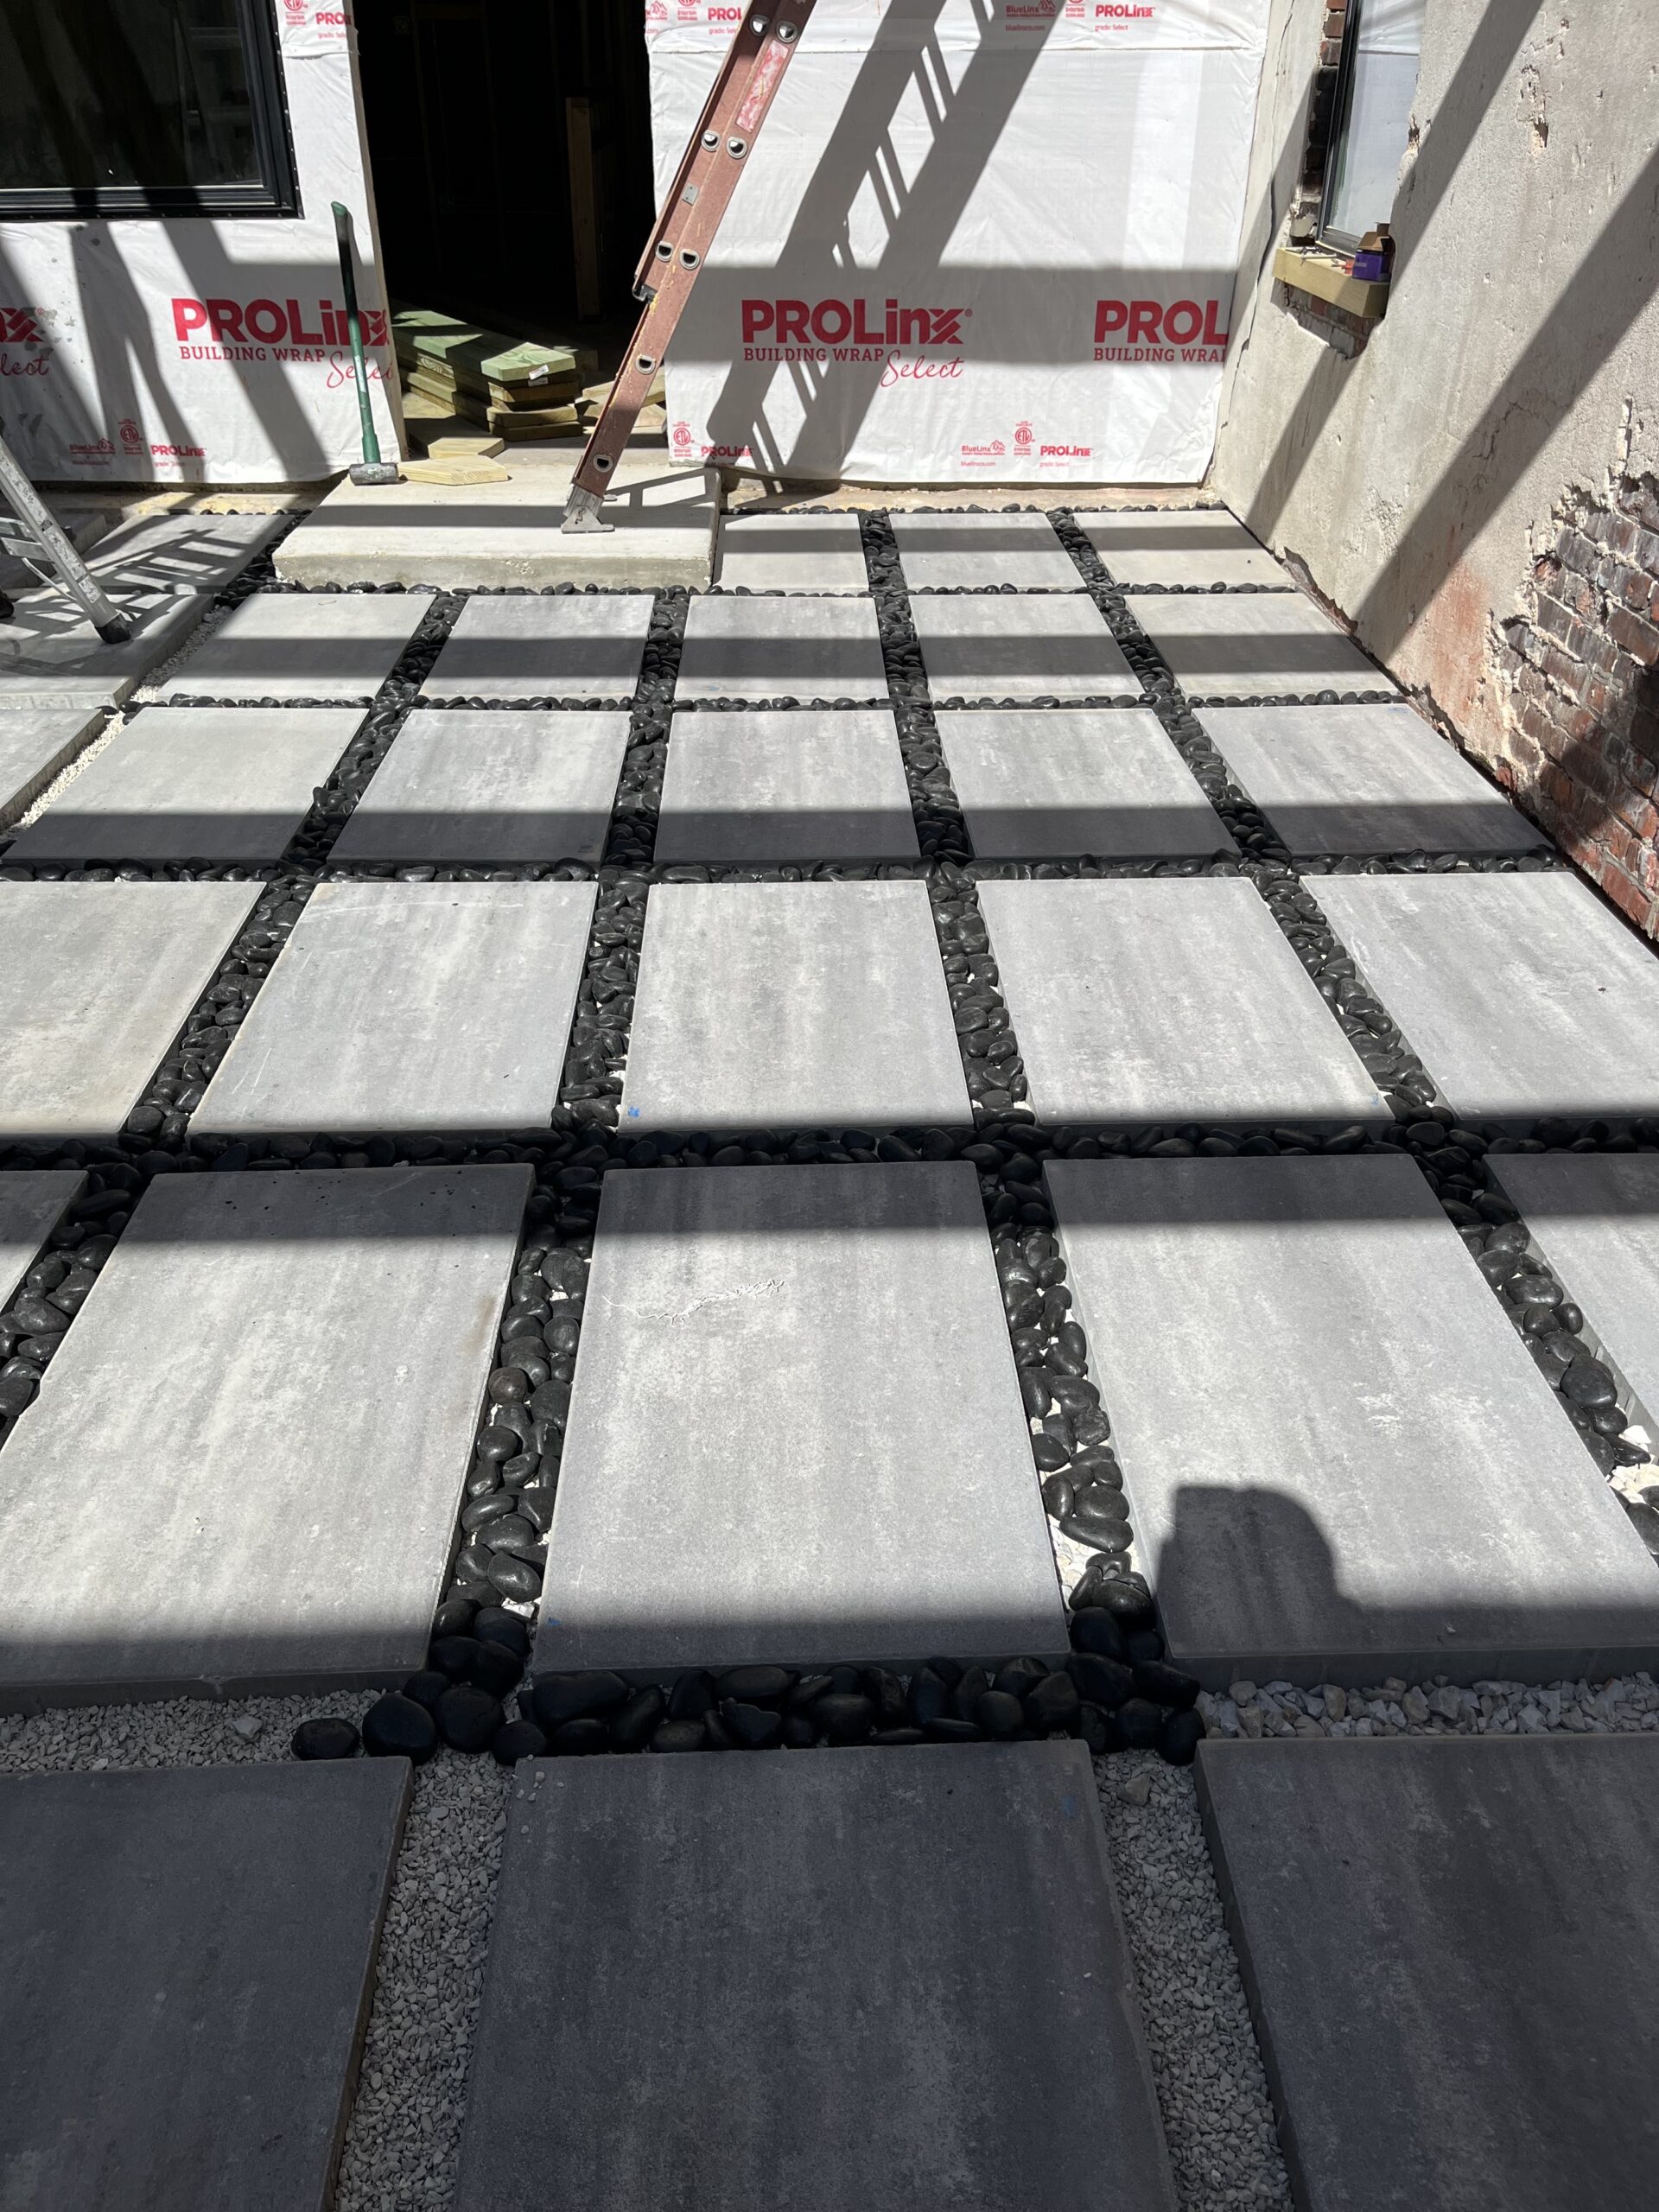 Cement patio of concrete blocks with black gravel in between square slabs